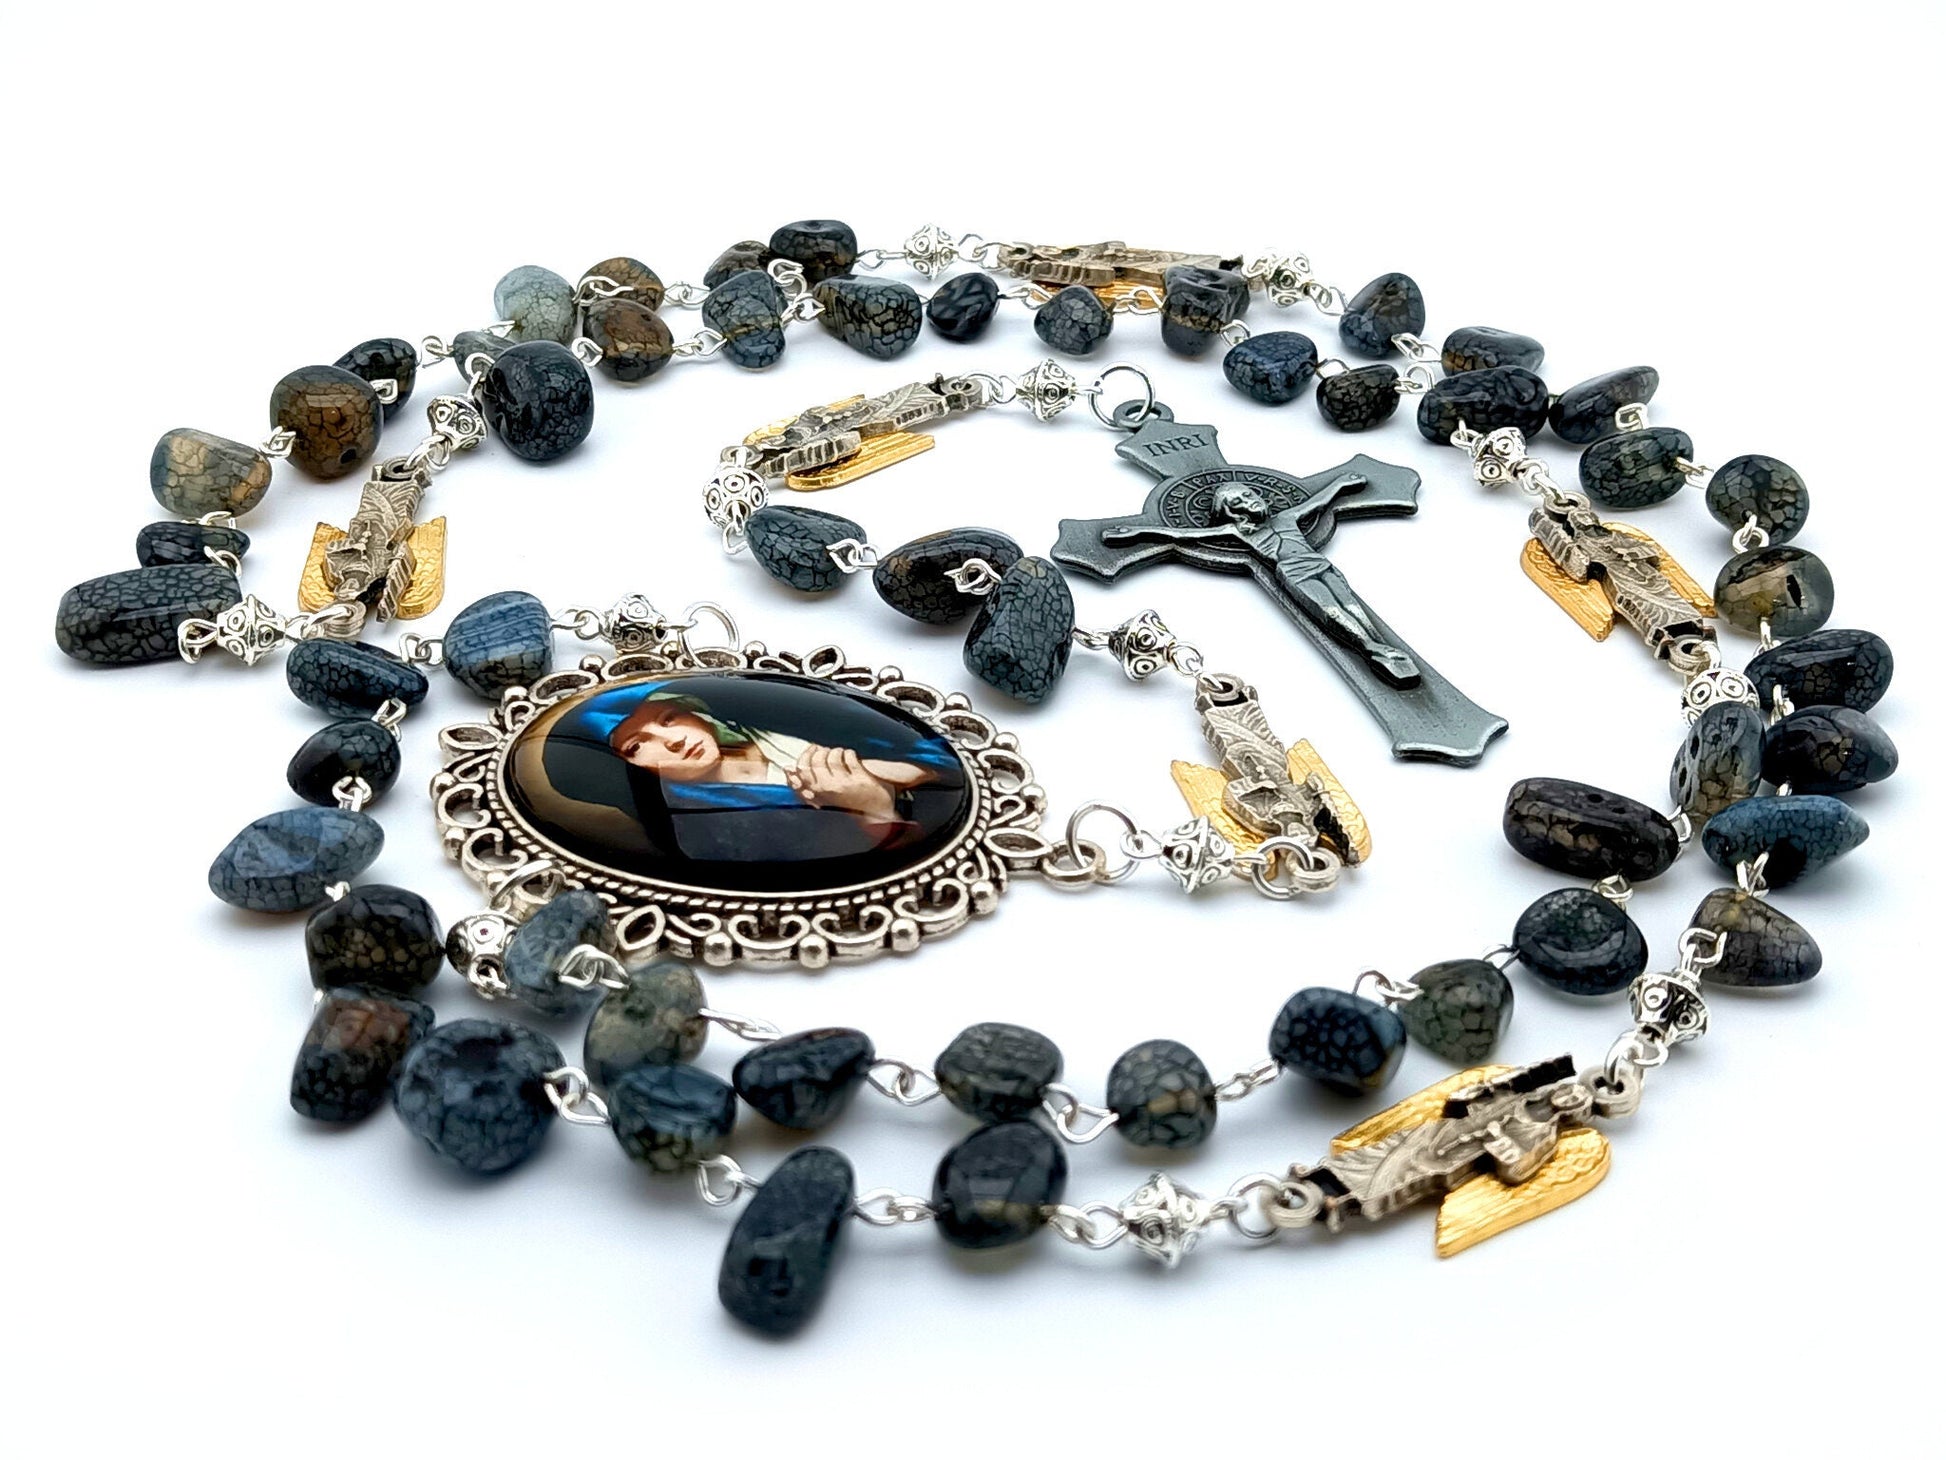 Our Lady of Sorrows unique rosary beads with quartz gemstone beads, pewter Saint Benedict crucifix, angel pater beads and large silver picture centre medal.